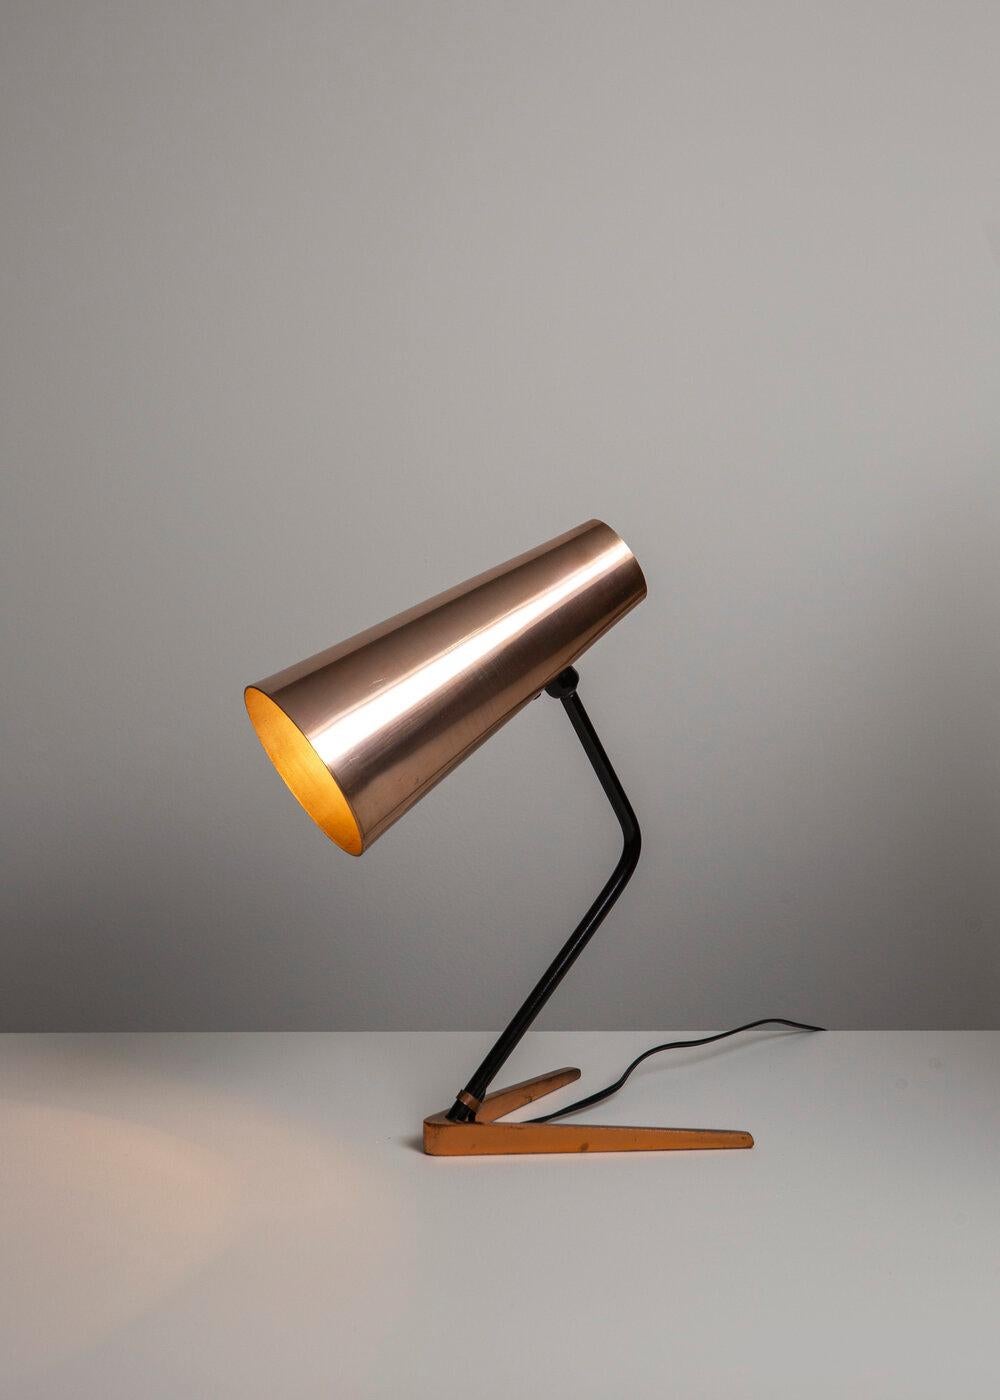 Stilux Milano Table Lamp In Good Condition For Sale In Montréal, QC